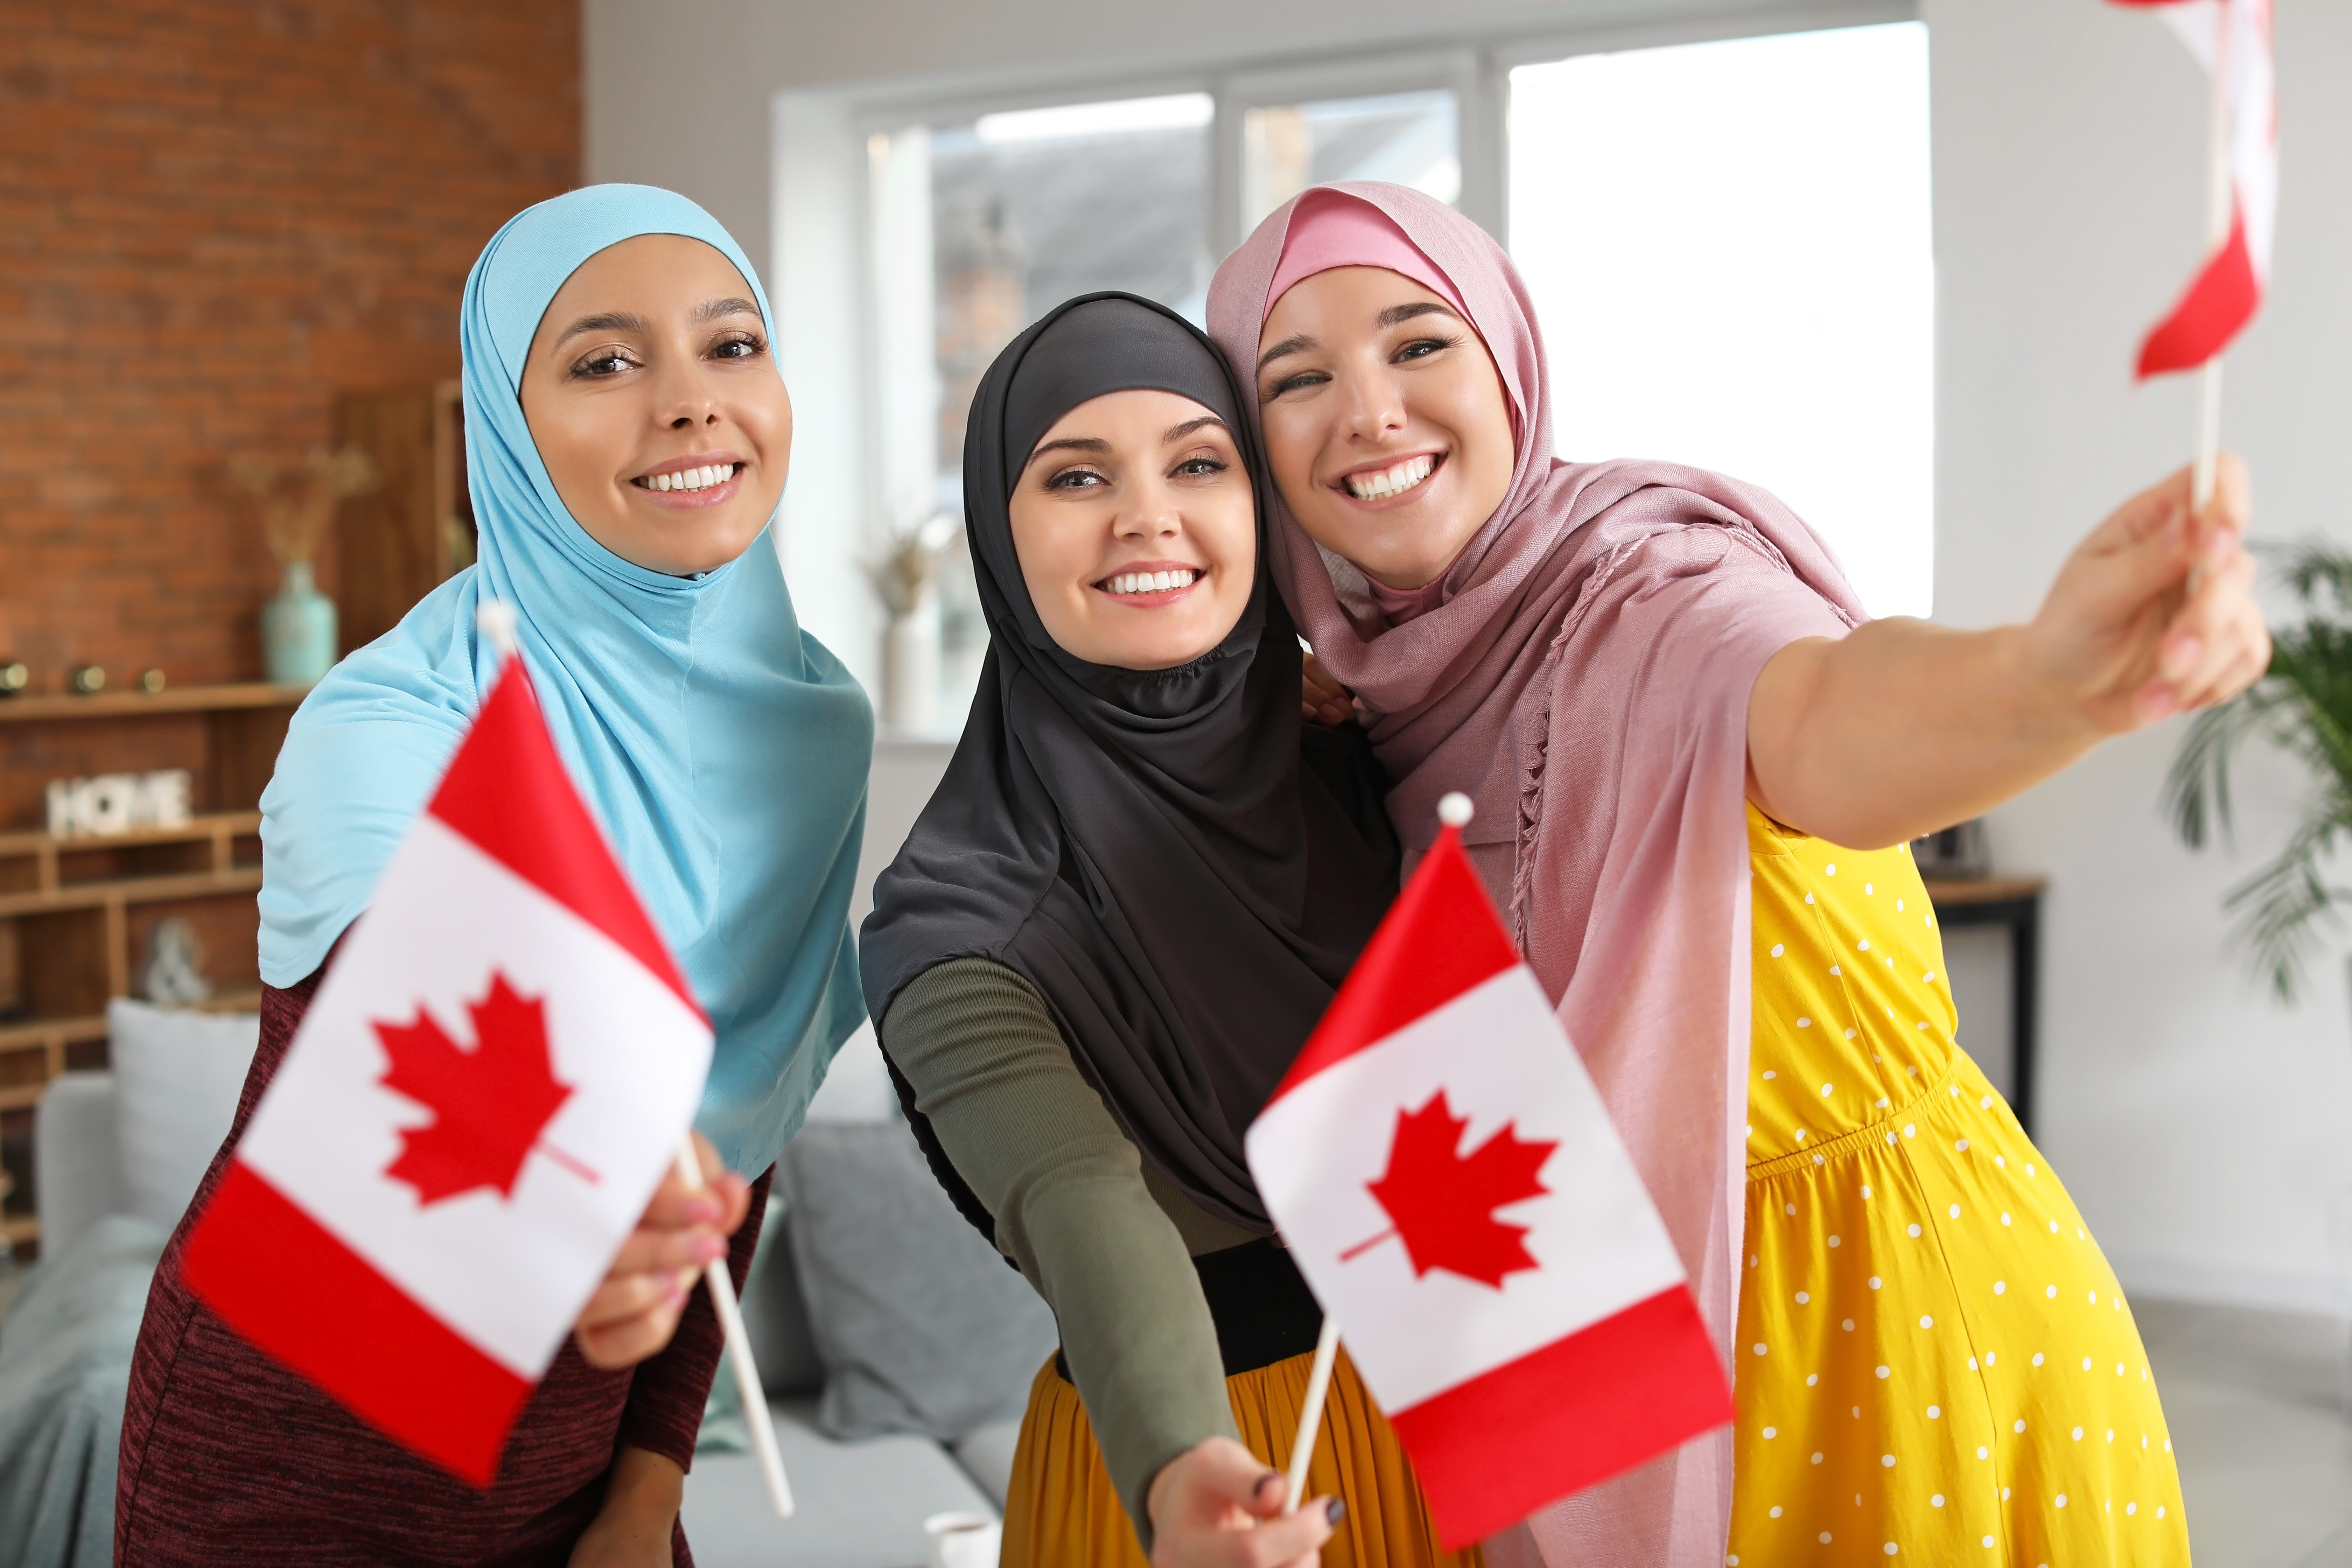 Muslims Grlssex - Hijab: You Don't Have to Wear That in Canada